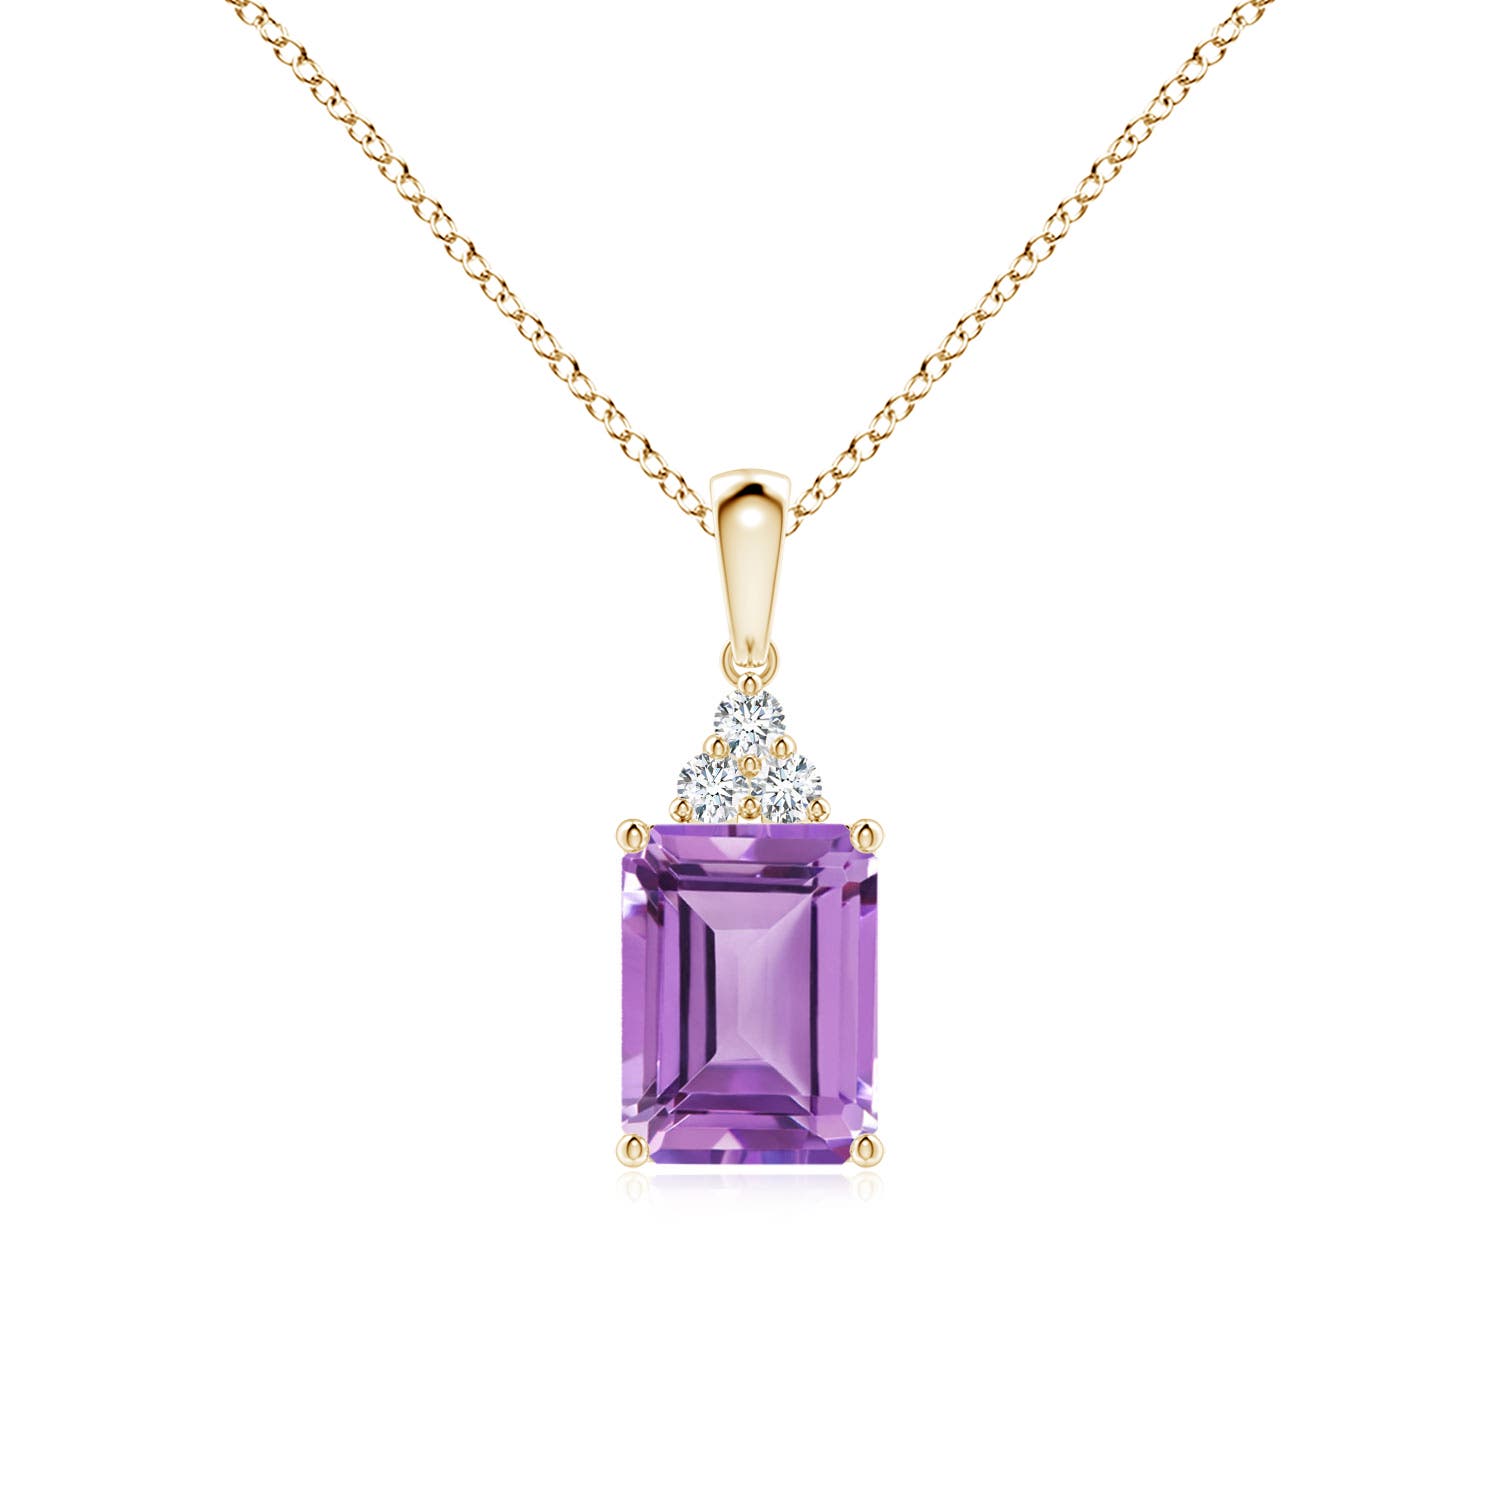 A - Amethyst / 1.56 CT / 14 KT Yellow Gold